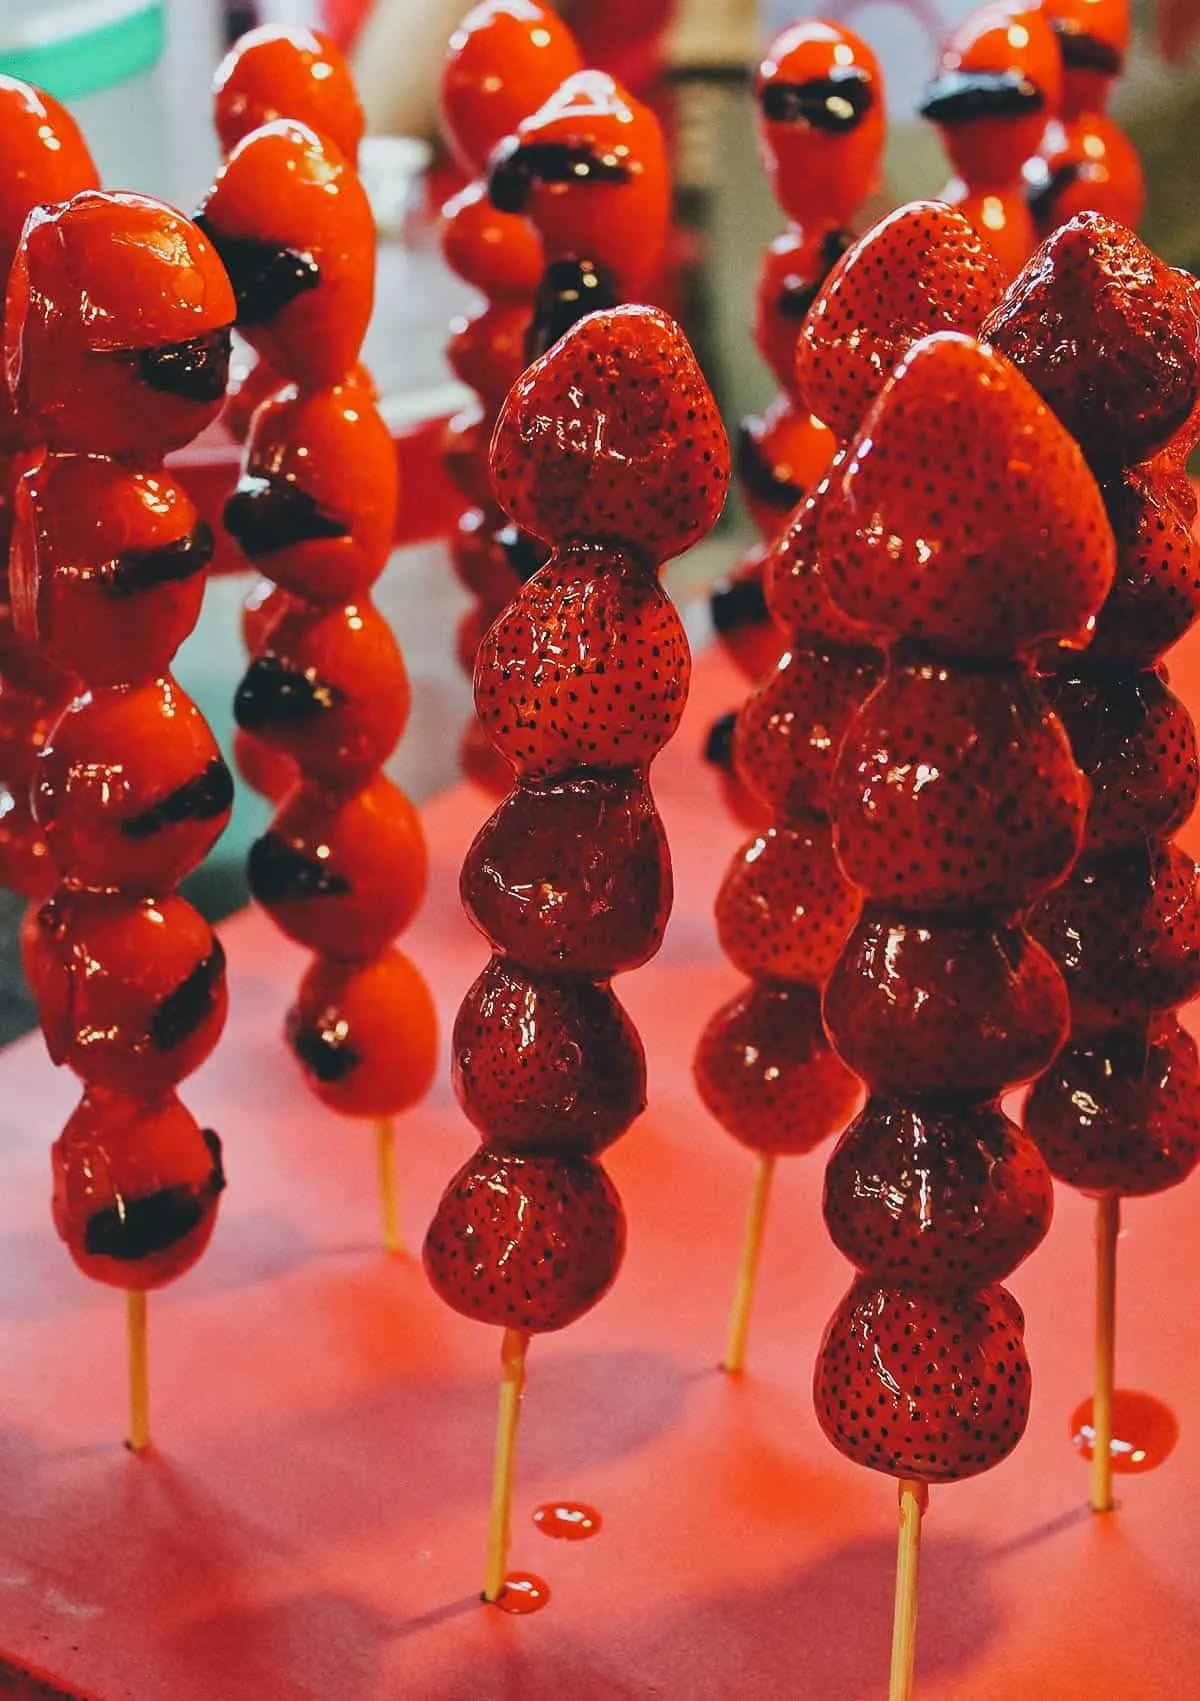 Tanghulu, a Taiwanese dessert made with fruit dipped in sugar syrup